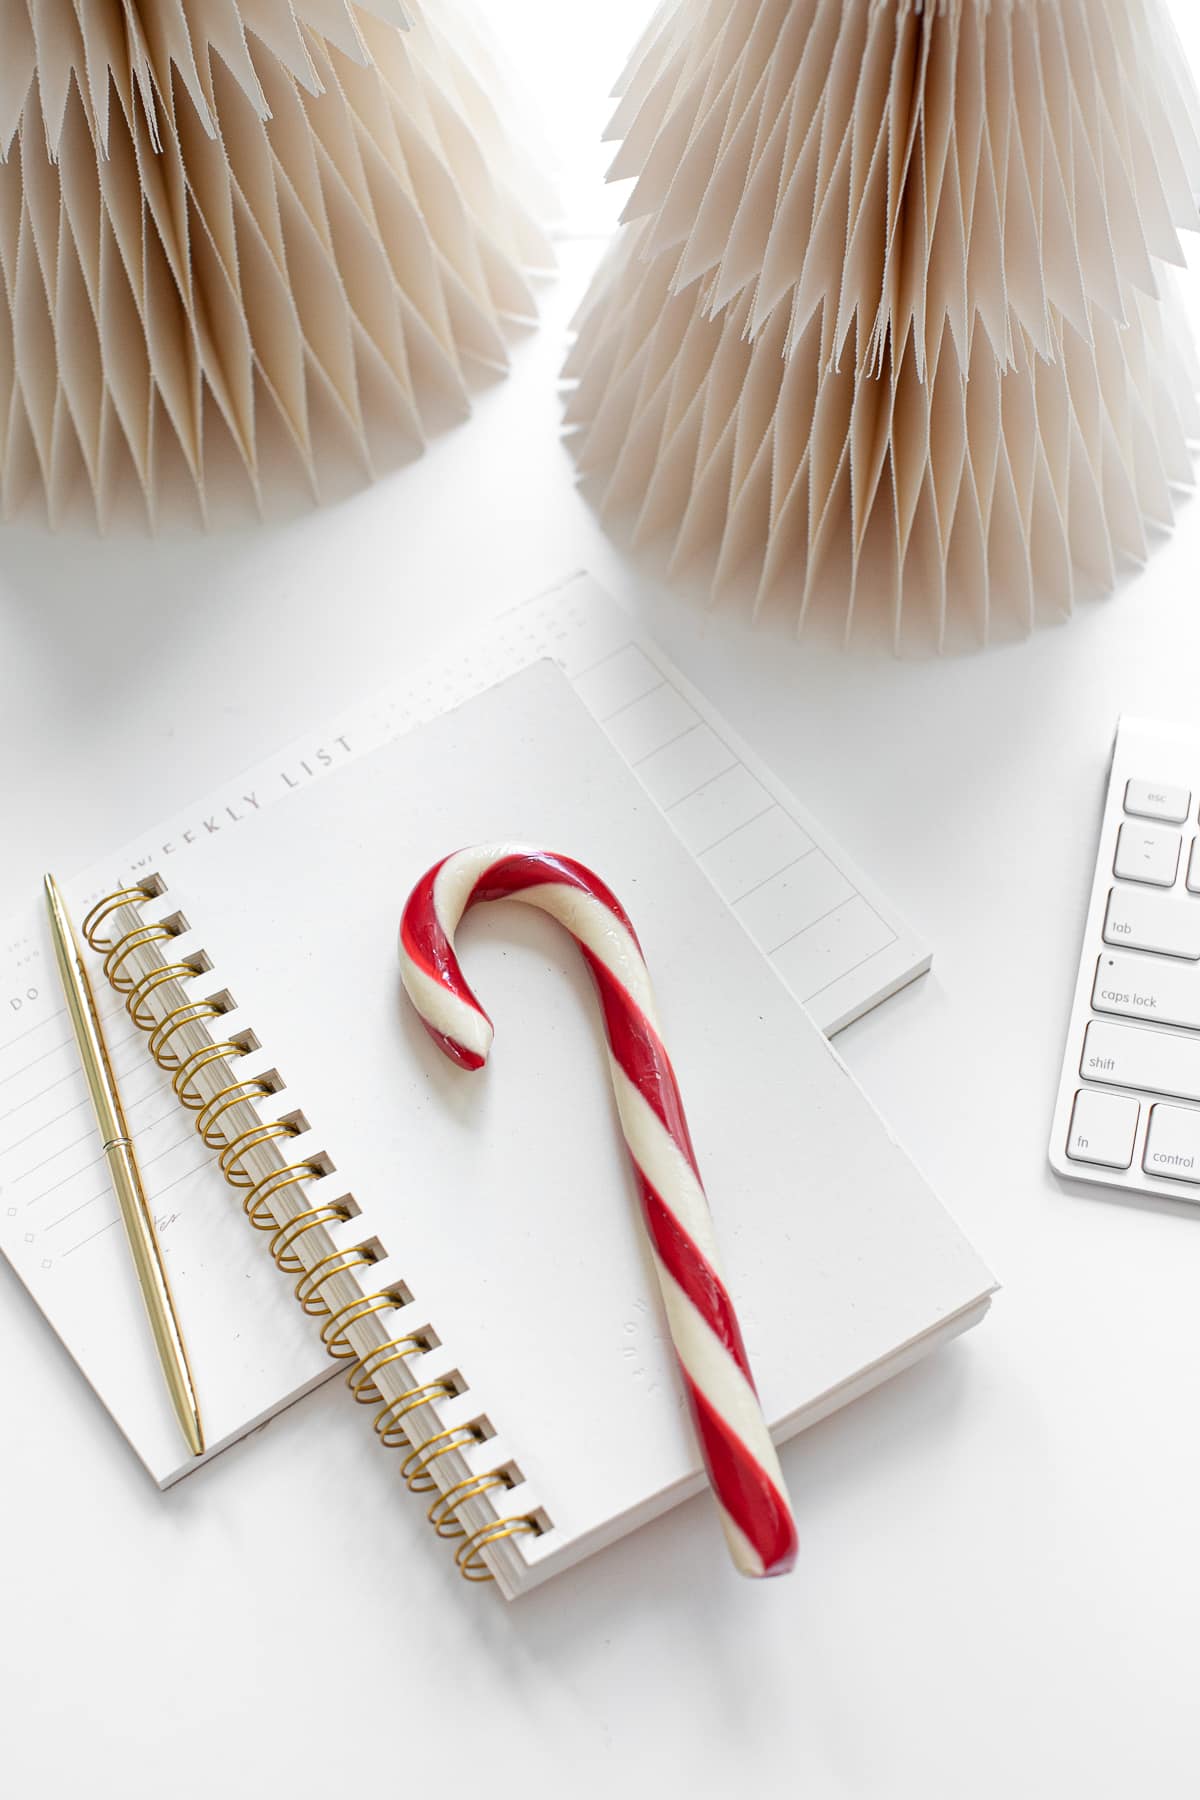 Stress-Free Christmas Planning Tips for a Relaxing December